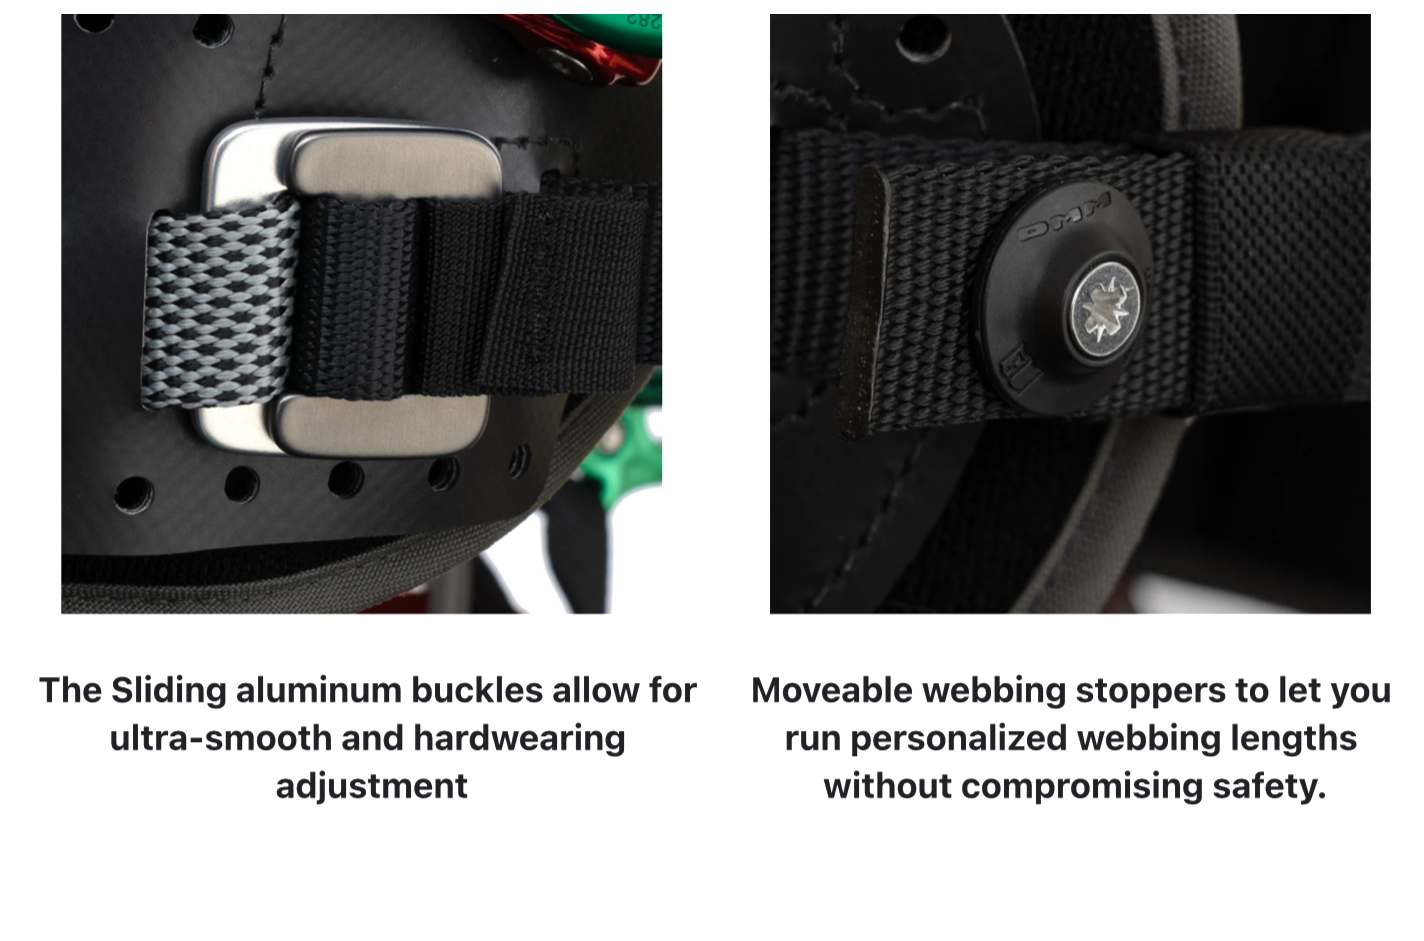 Sliding aluminum buckles on the dmm Kinisi max harness. Moveable webbing stoppers to allow the use of personalized webbing lengths.